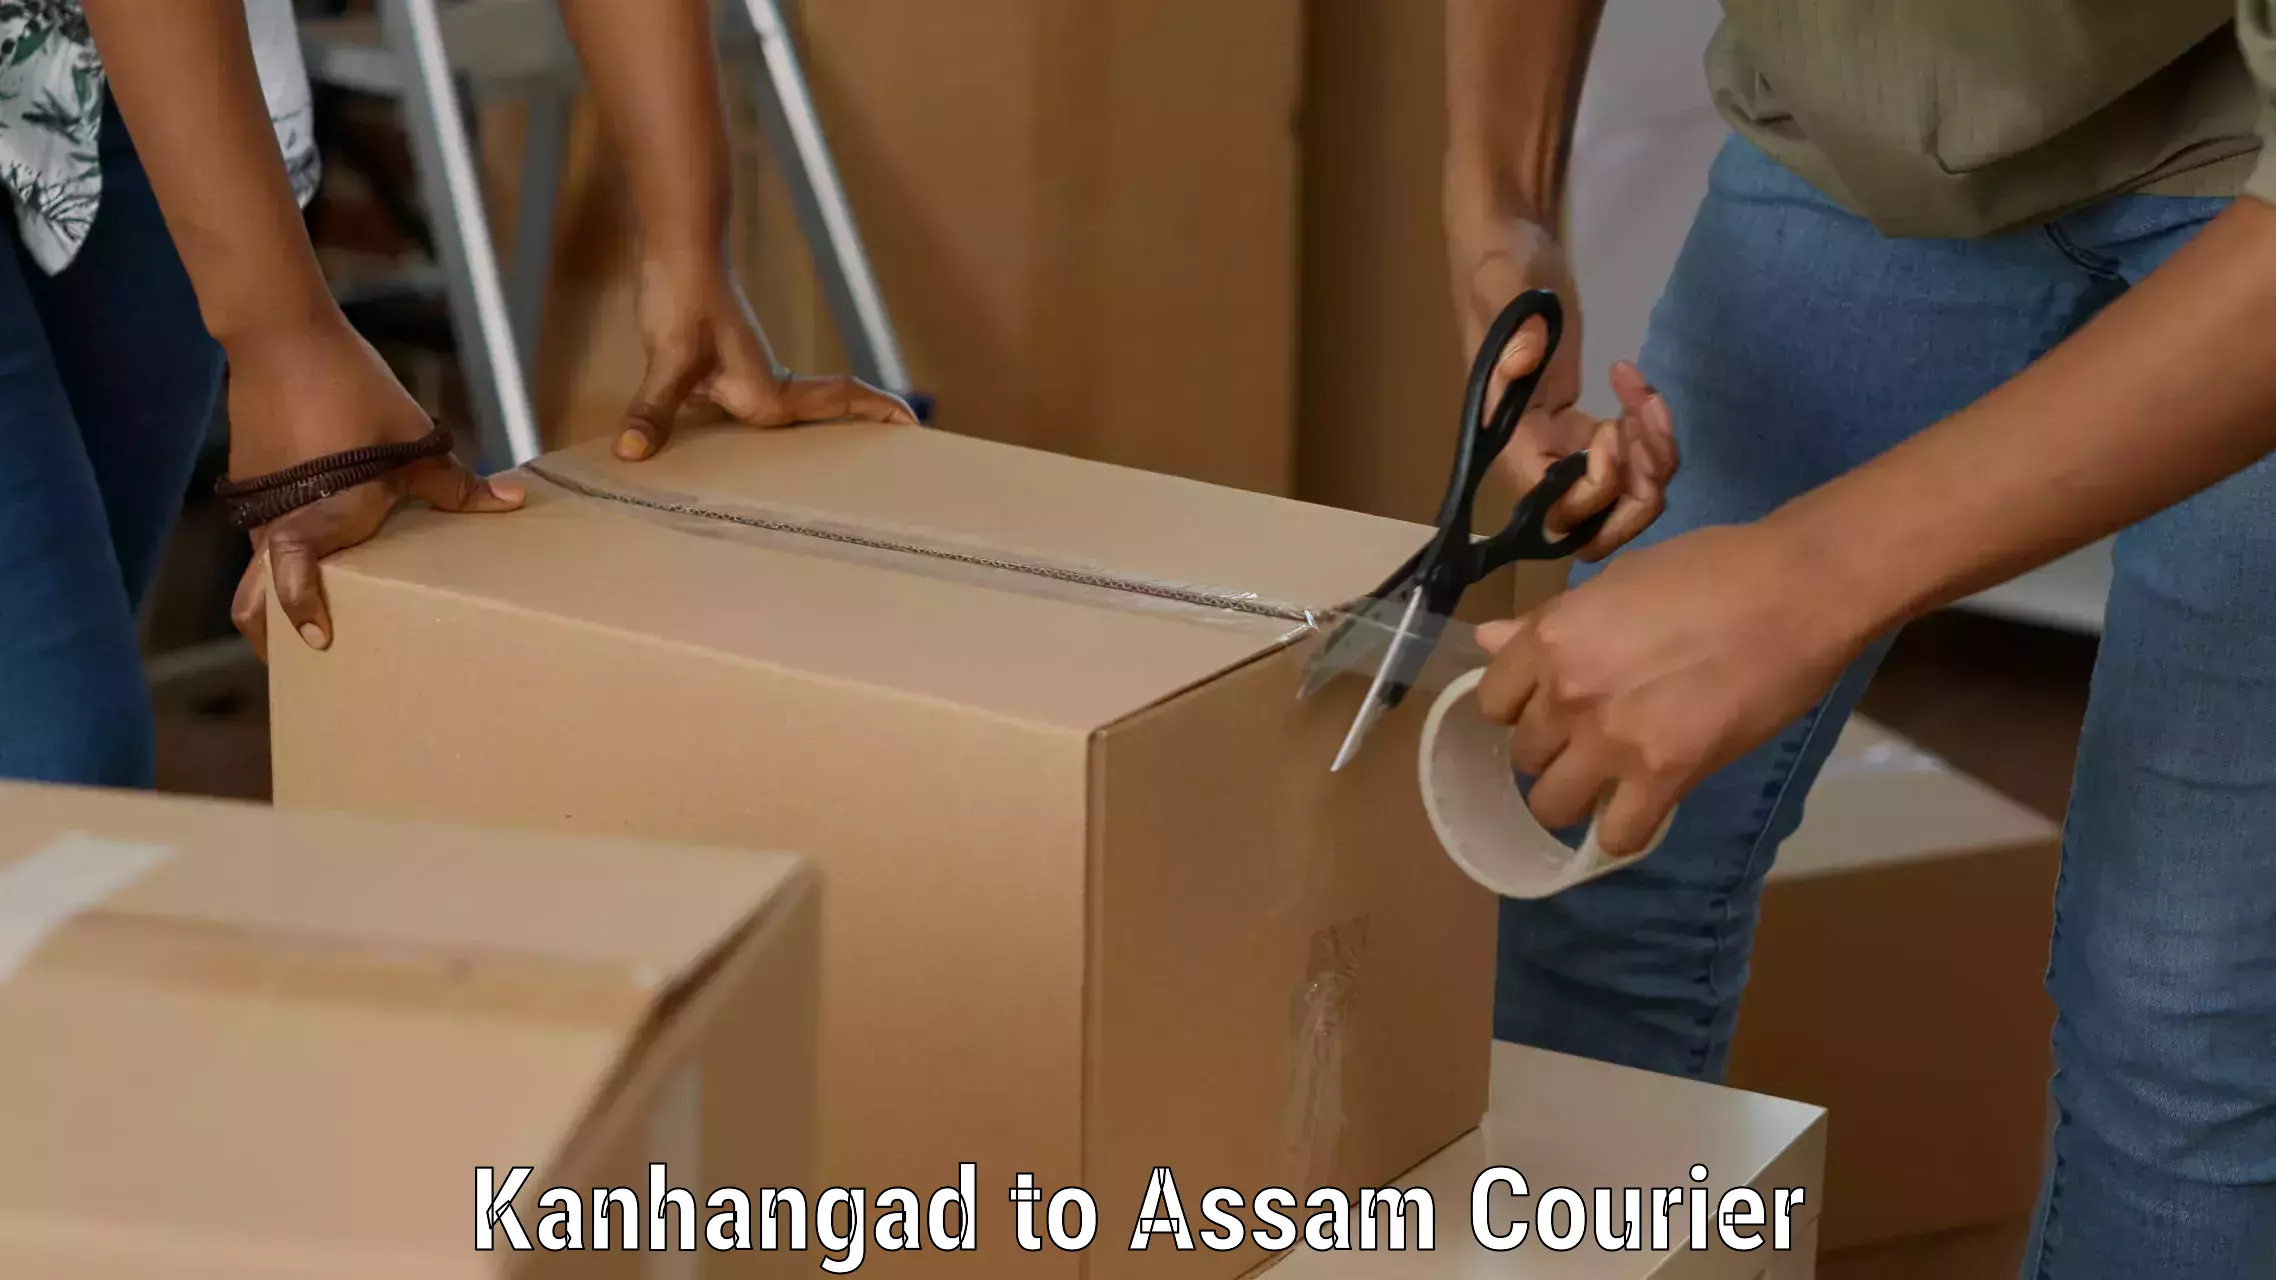 Global delivery options Kanhangad to Assam